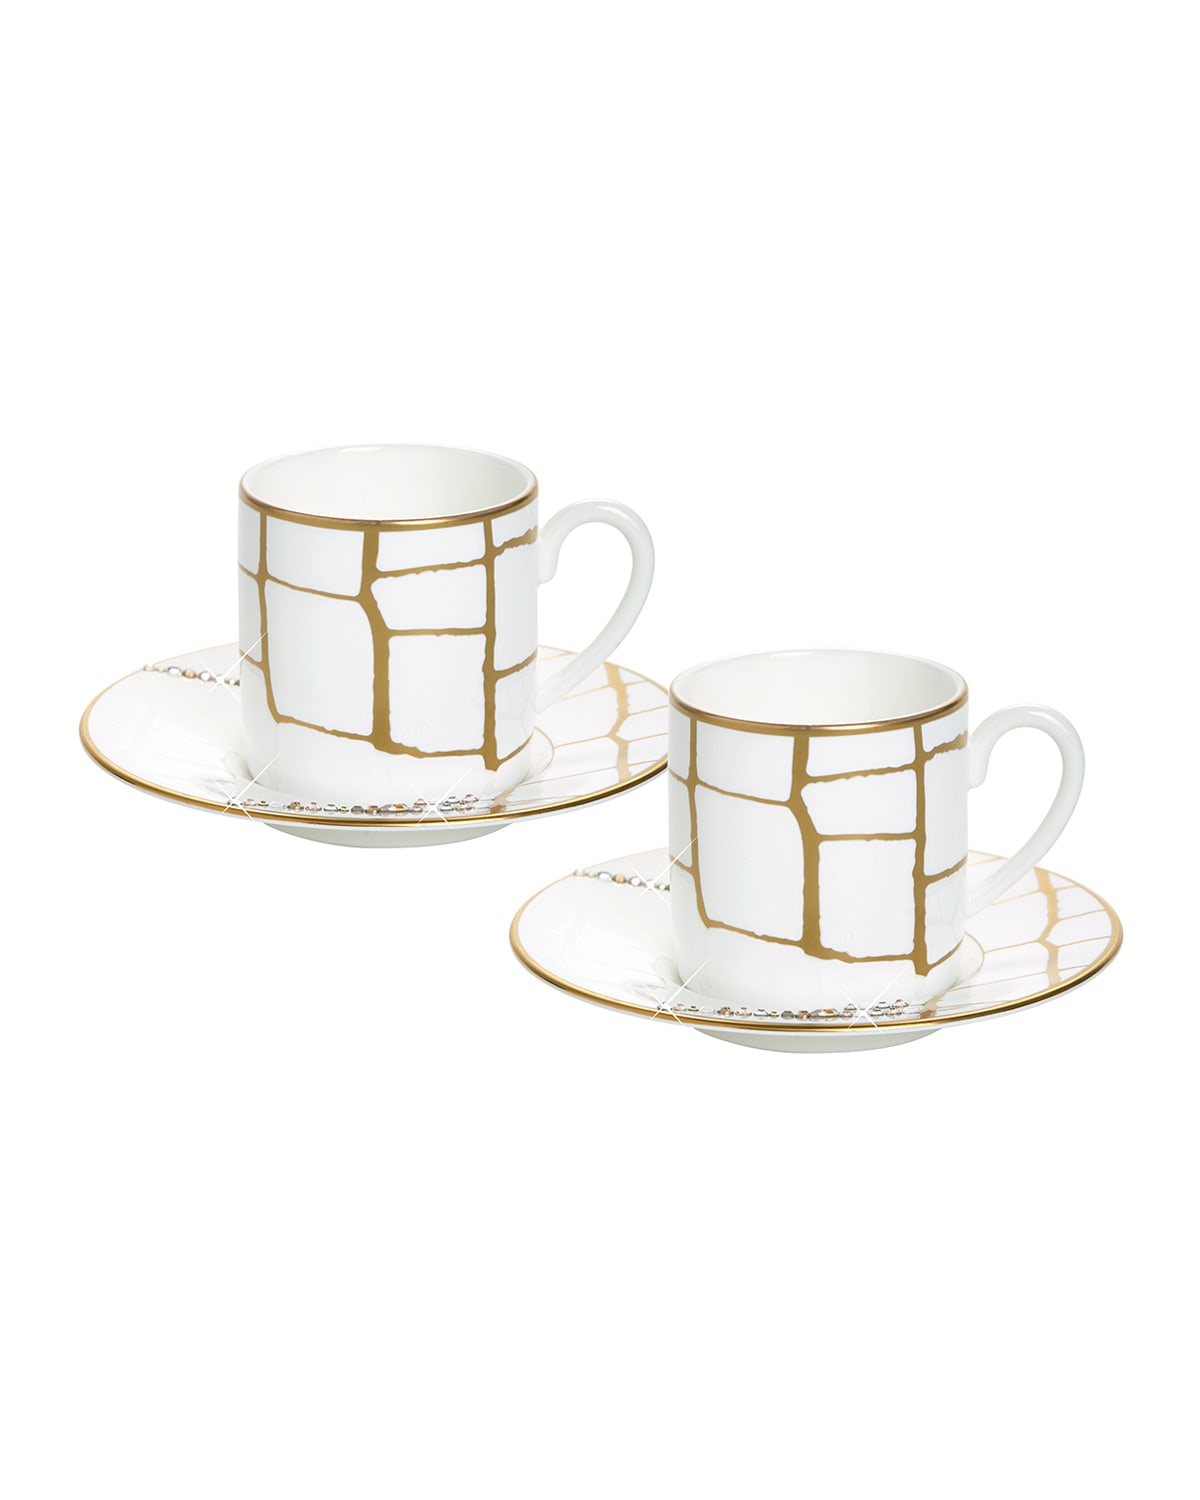 Prouna Alligator Espresso Cups & Crystal Saucers, Set Of 2 In Gold